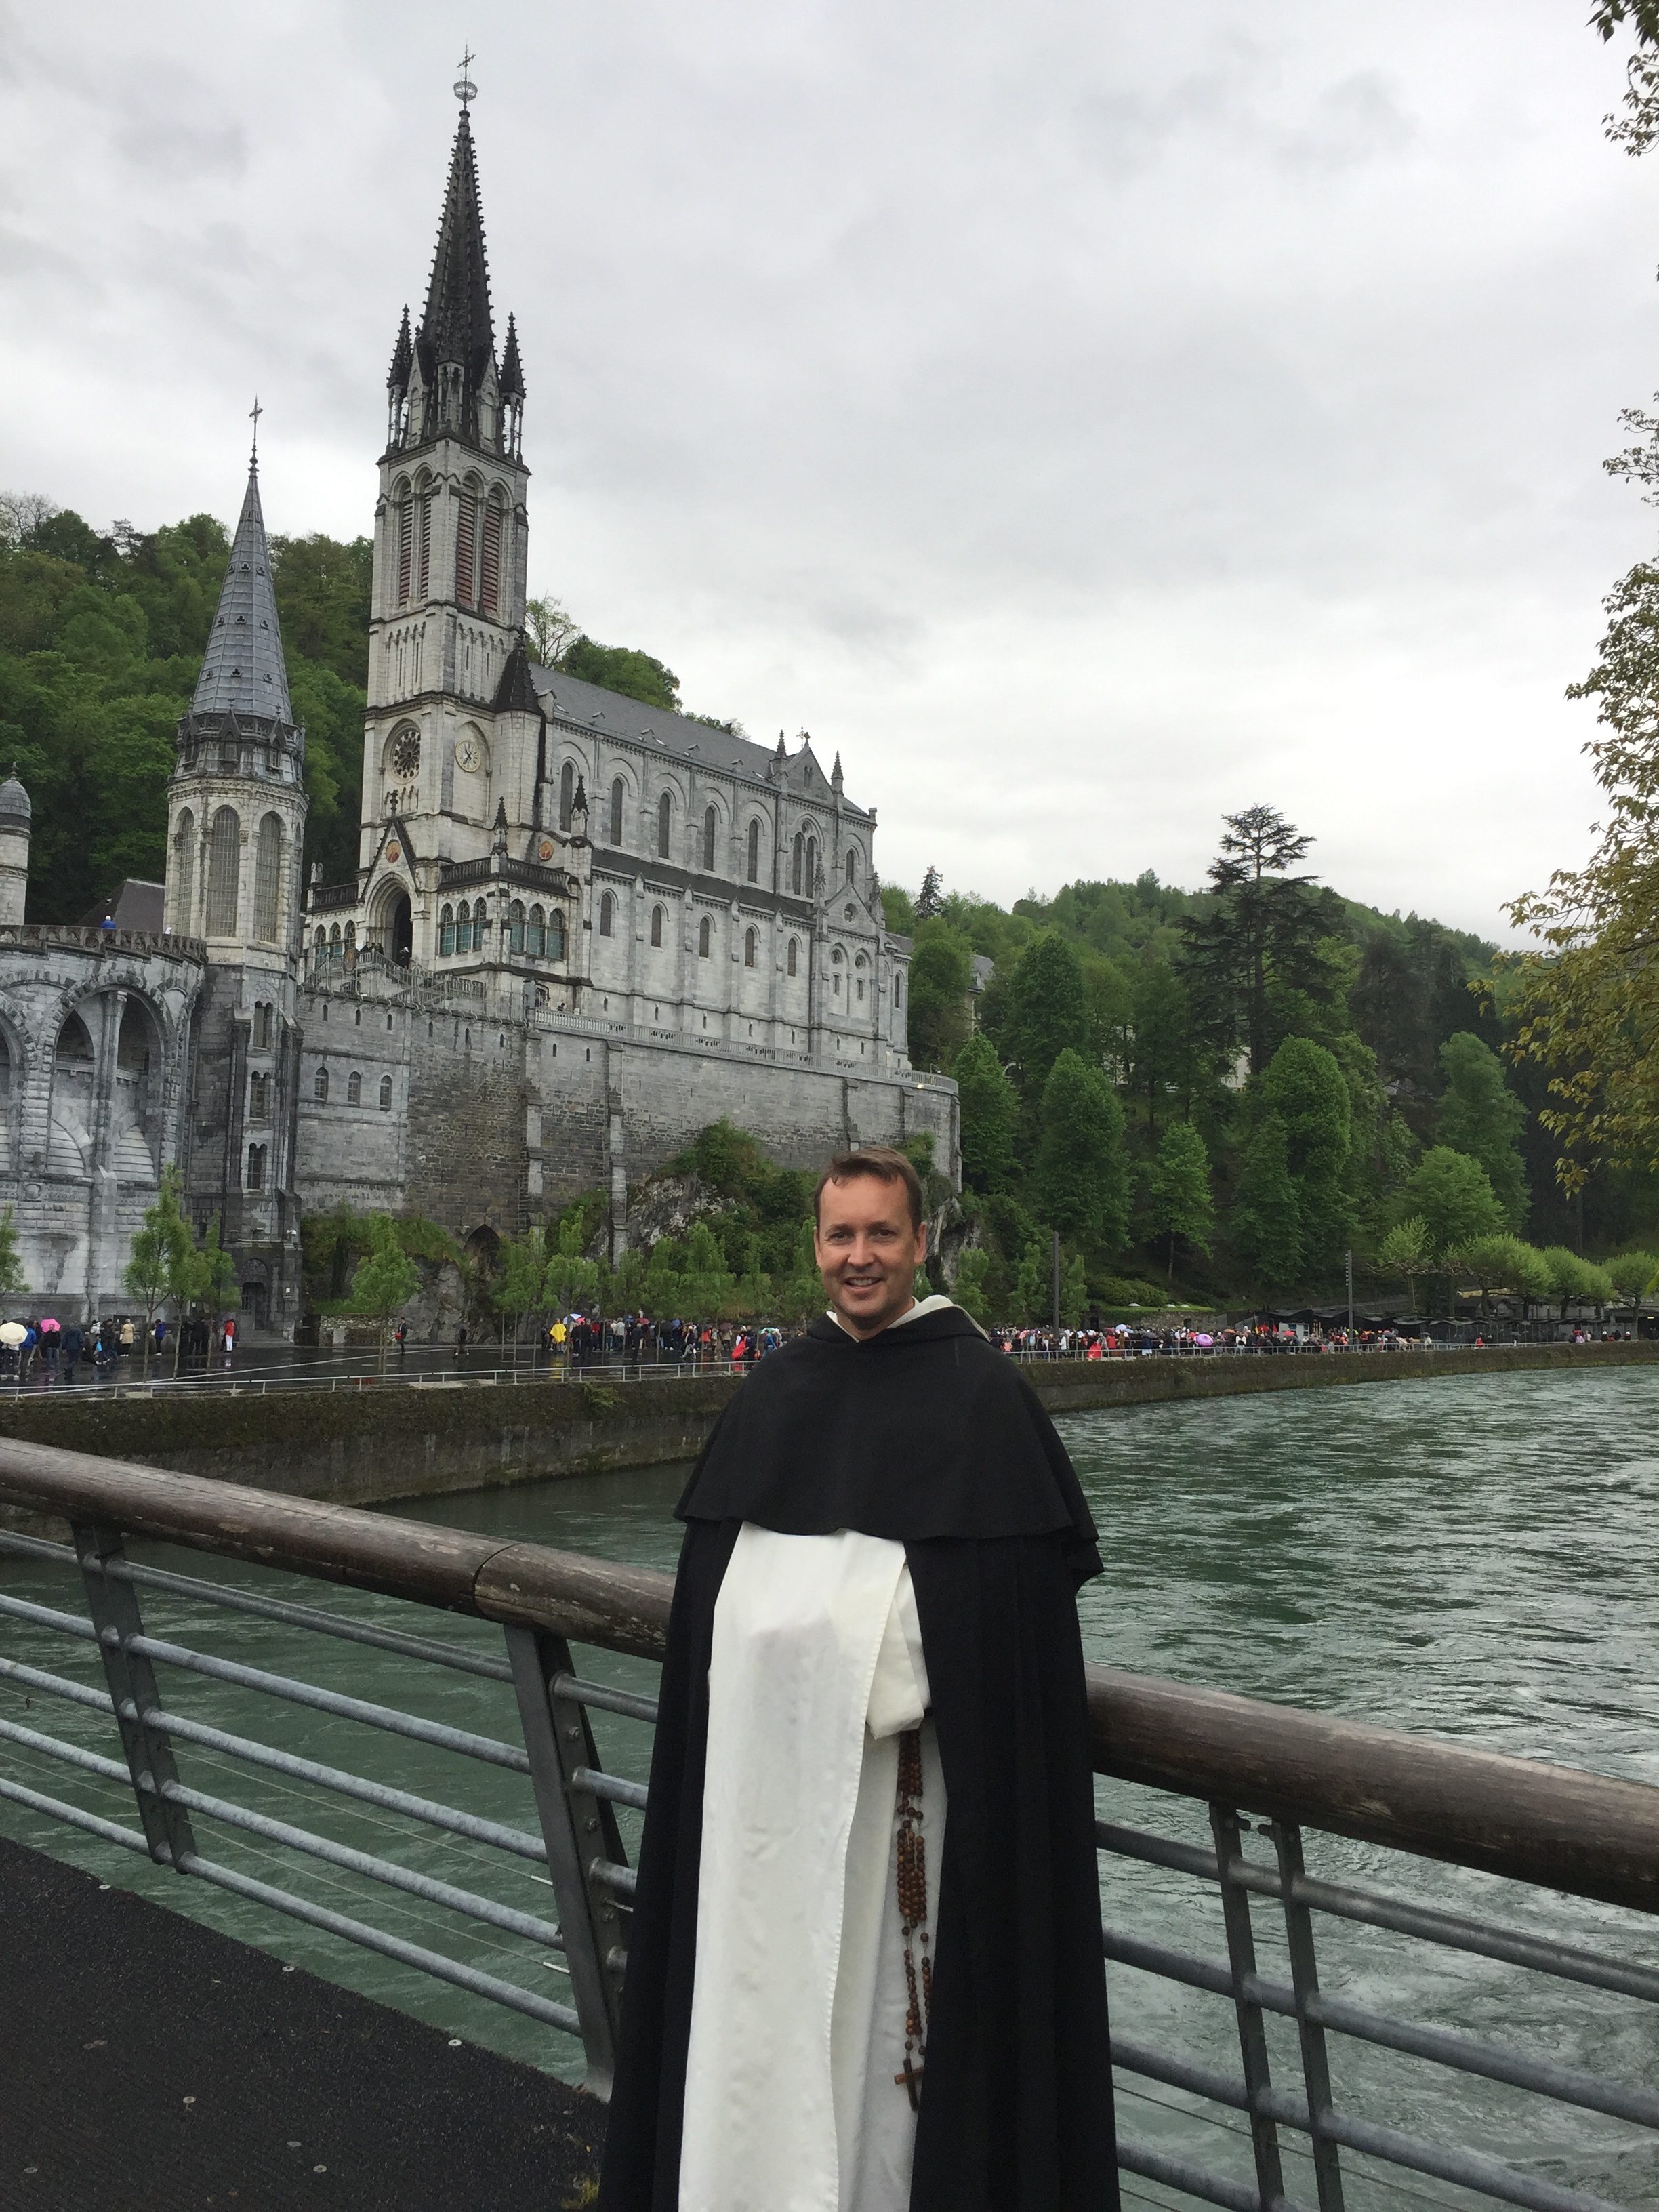 Our Lady Of Lourdes / It's a beautiful holy ground modeled after